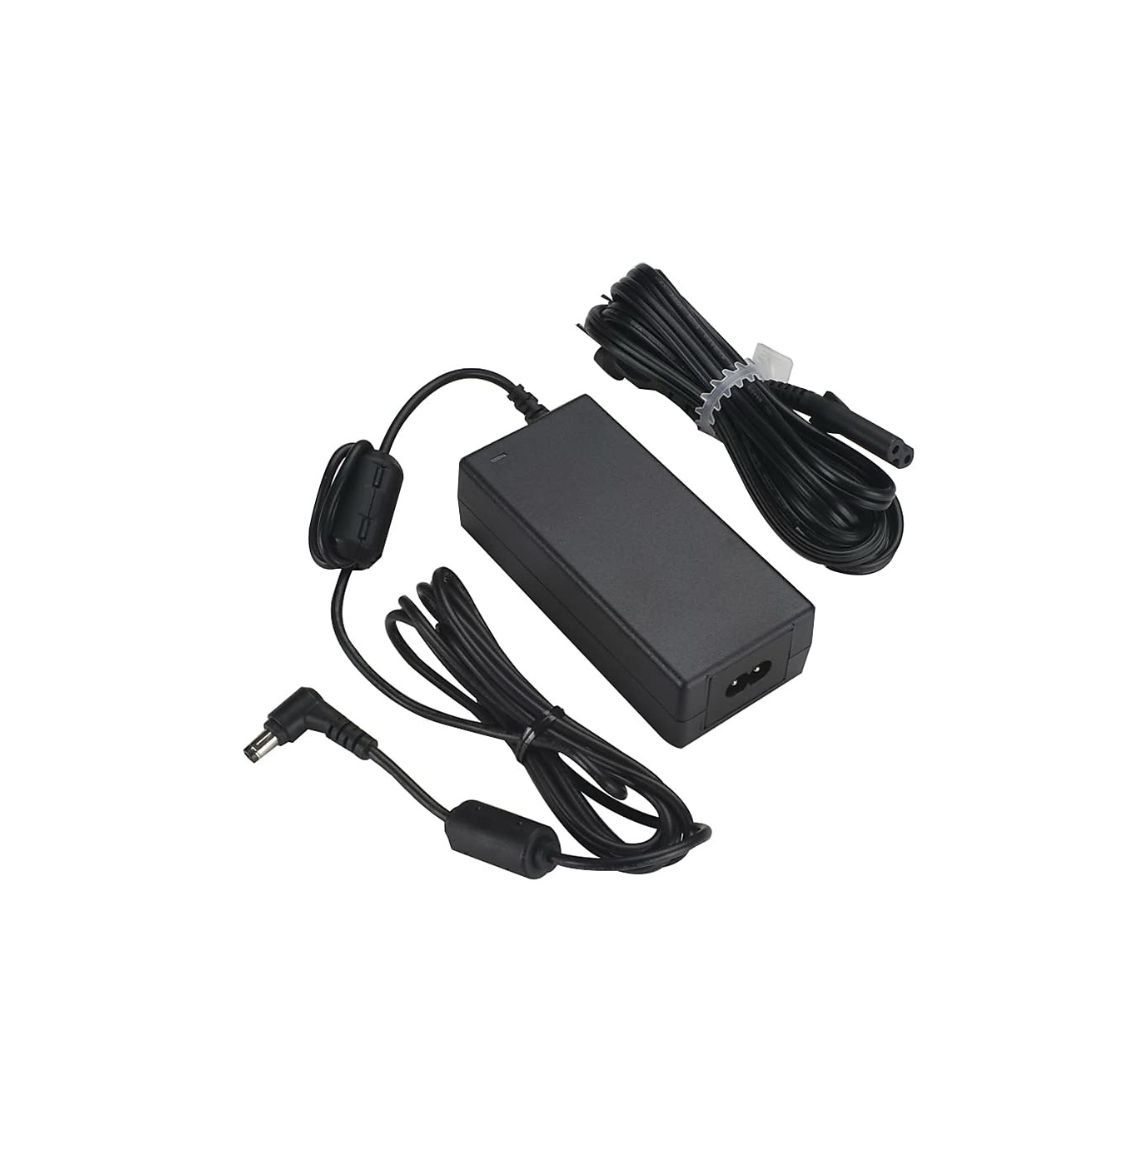 Brother Mobile LB3834 AC Adapter for Ruggedjet 3 and 4 and Pocketjet 3, 6 and 7 Includes AC Cable